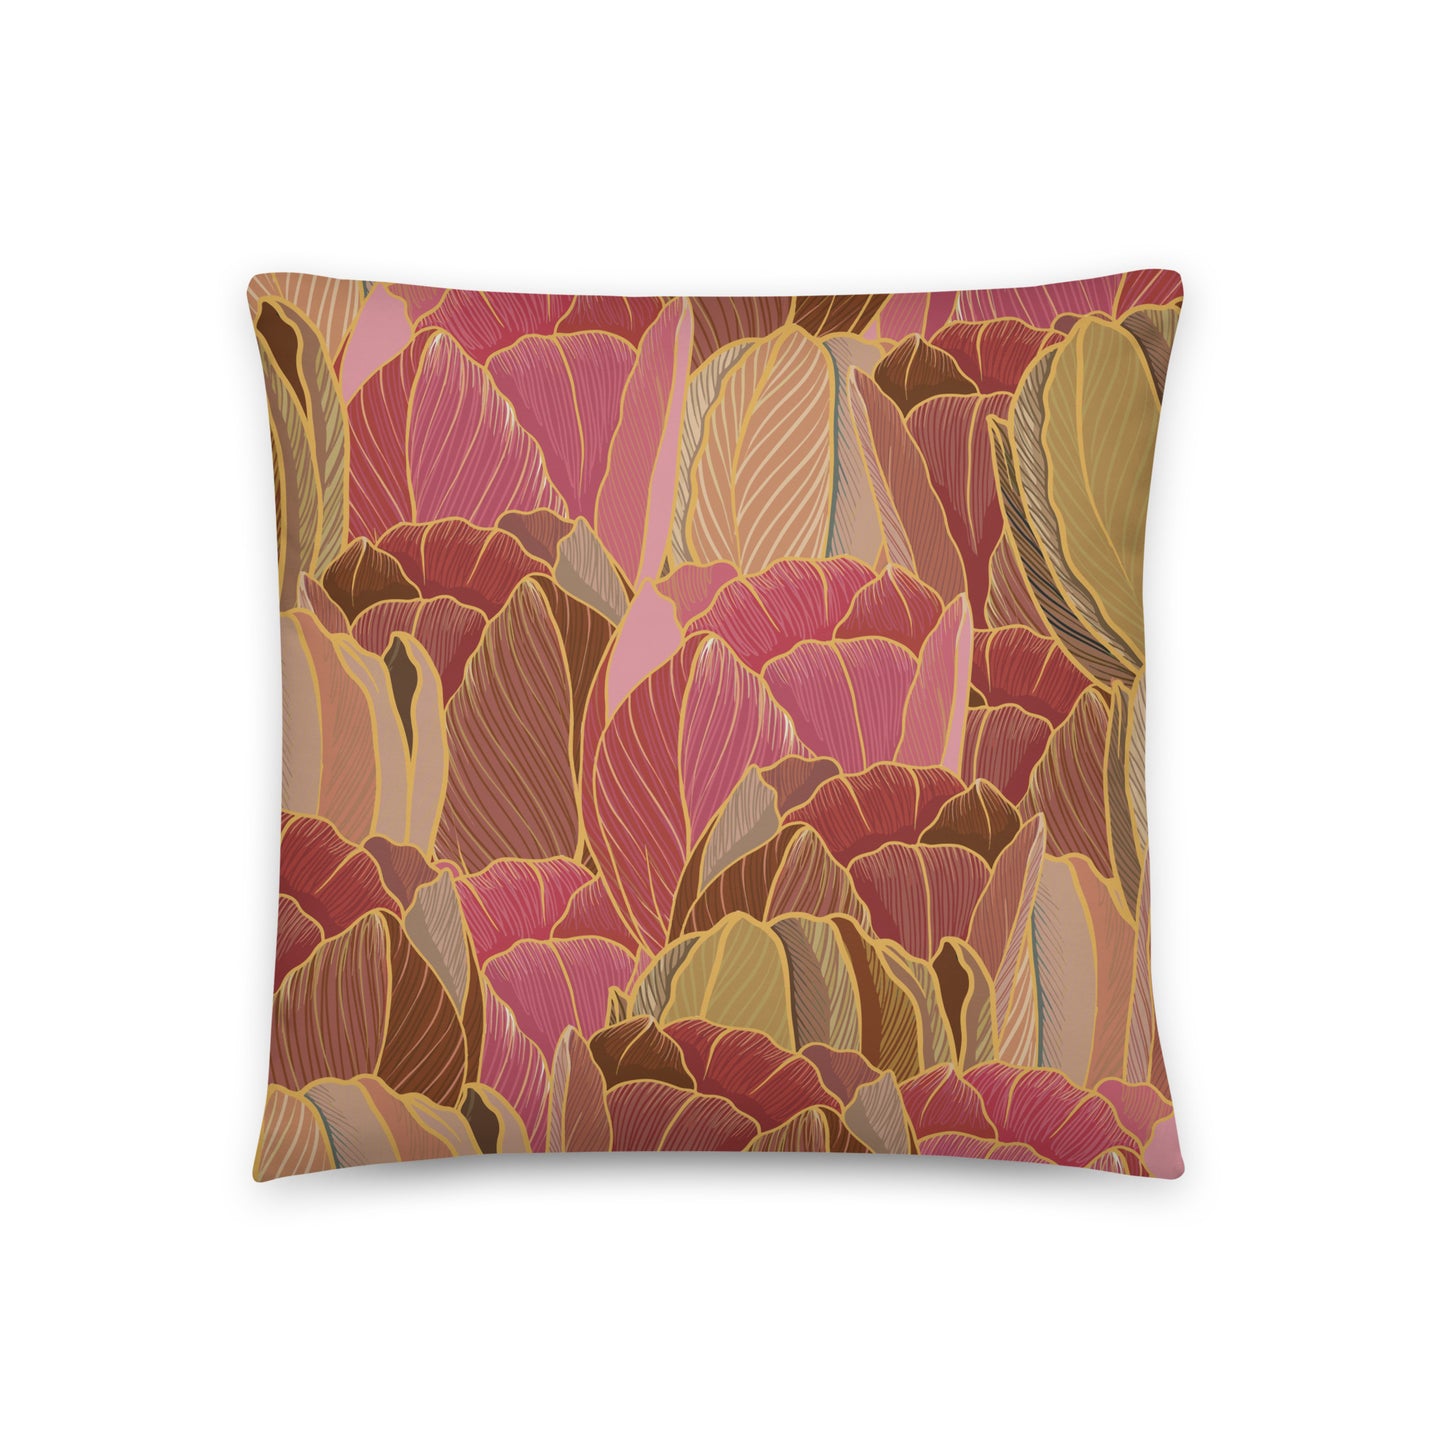 Tulip - Sustainably Made Pillows